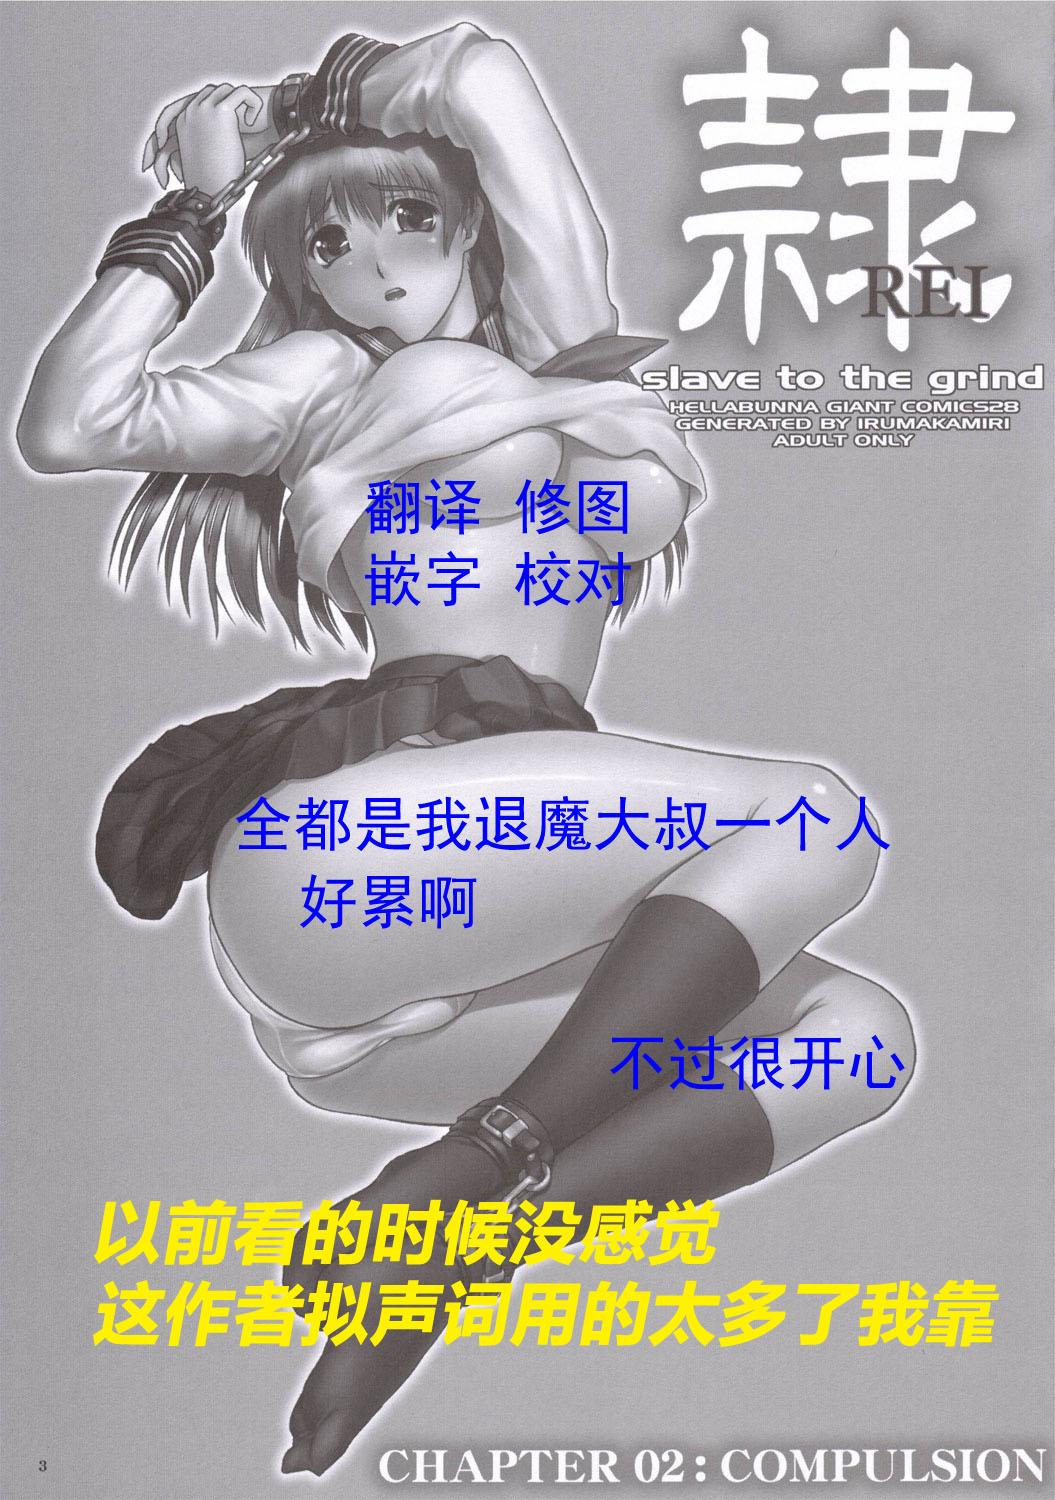 Public Fuck (C69) [Hellabunna (Iruma Kamiri)] REI - slave to the grind - CHAPTER 02: COMPULSION (Dead or Alive) [Chinese] [退魔大叔个人汉化] - Dead or alive Girl On Girl - Page 3